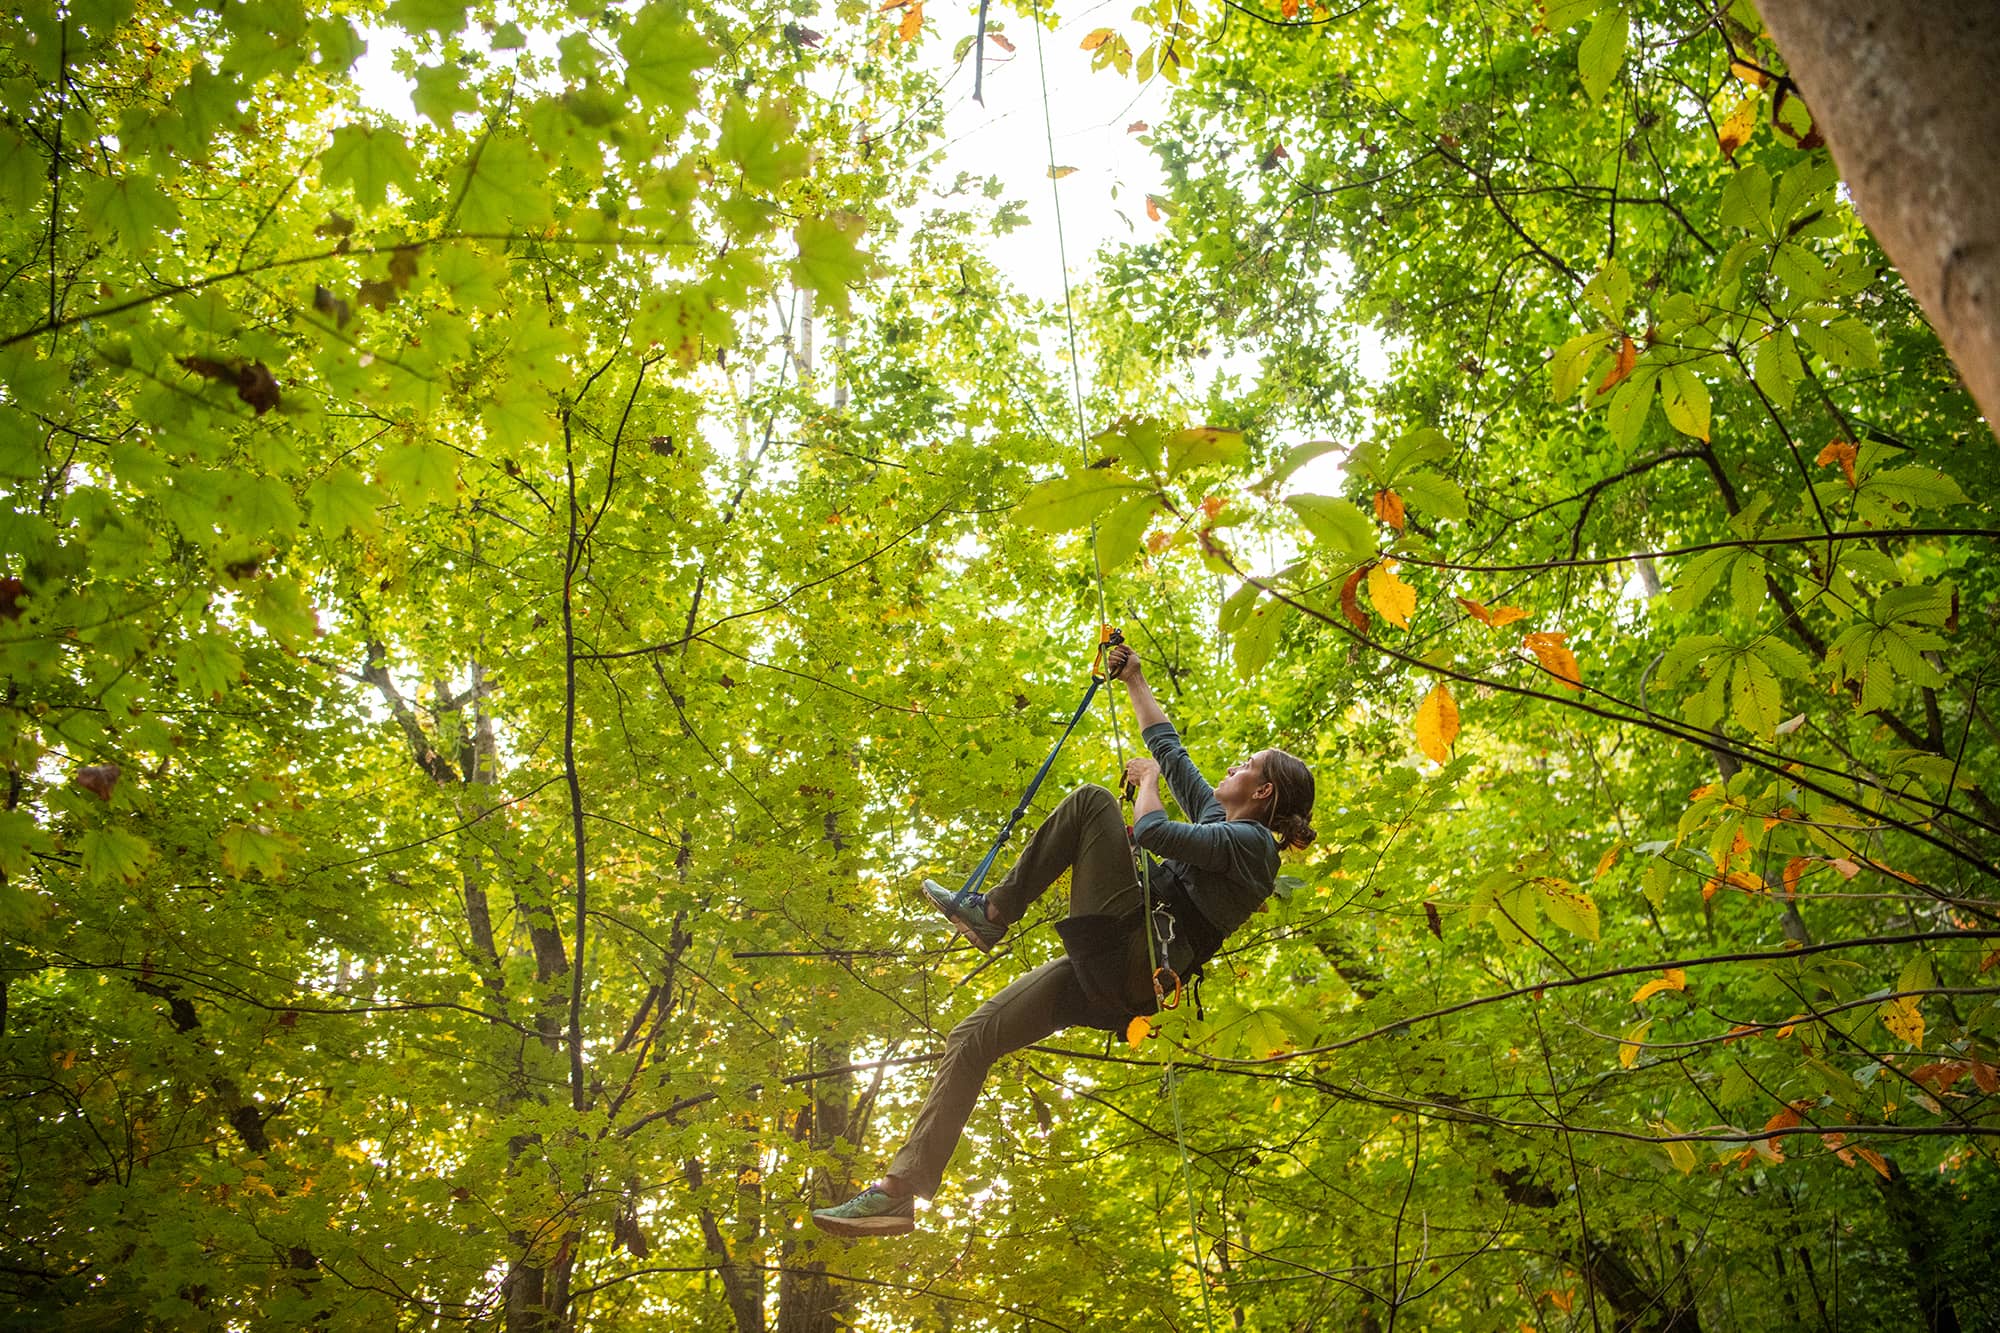 Doctoral student Kelsey Bryant researches the canopy in the Land Lab at the Ridges.